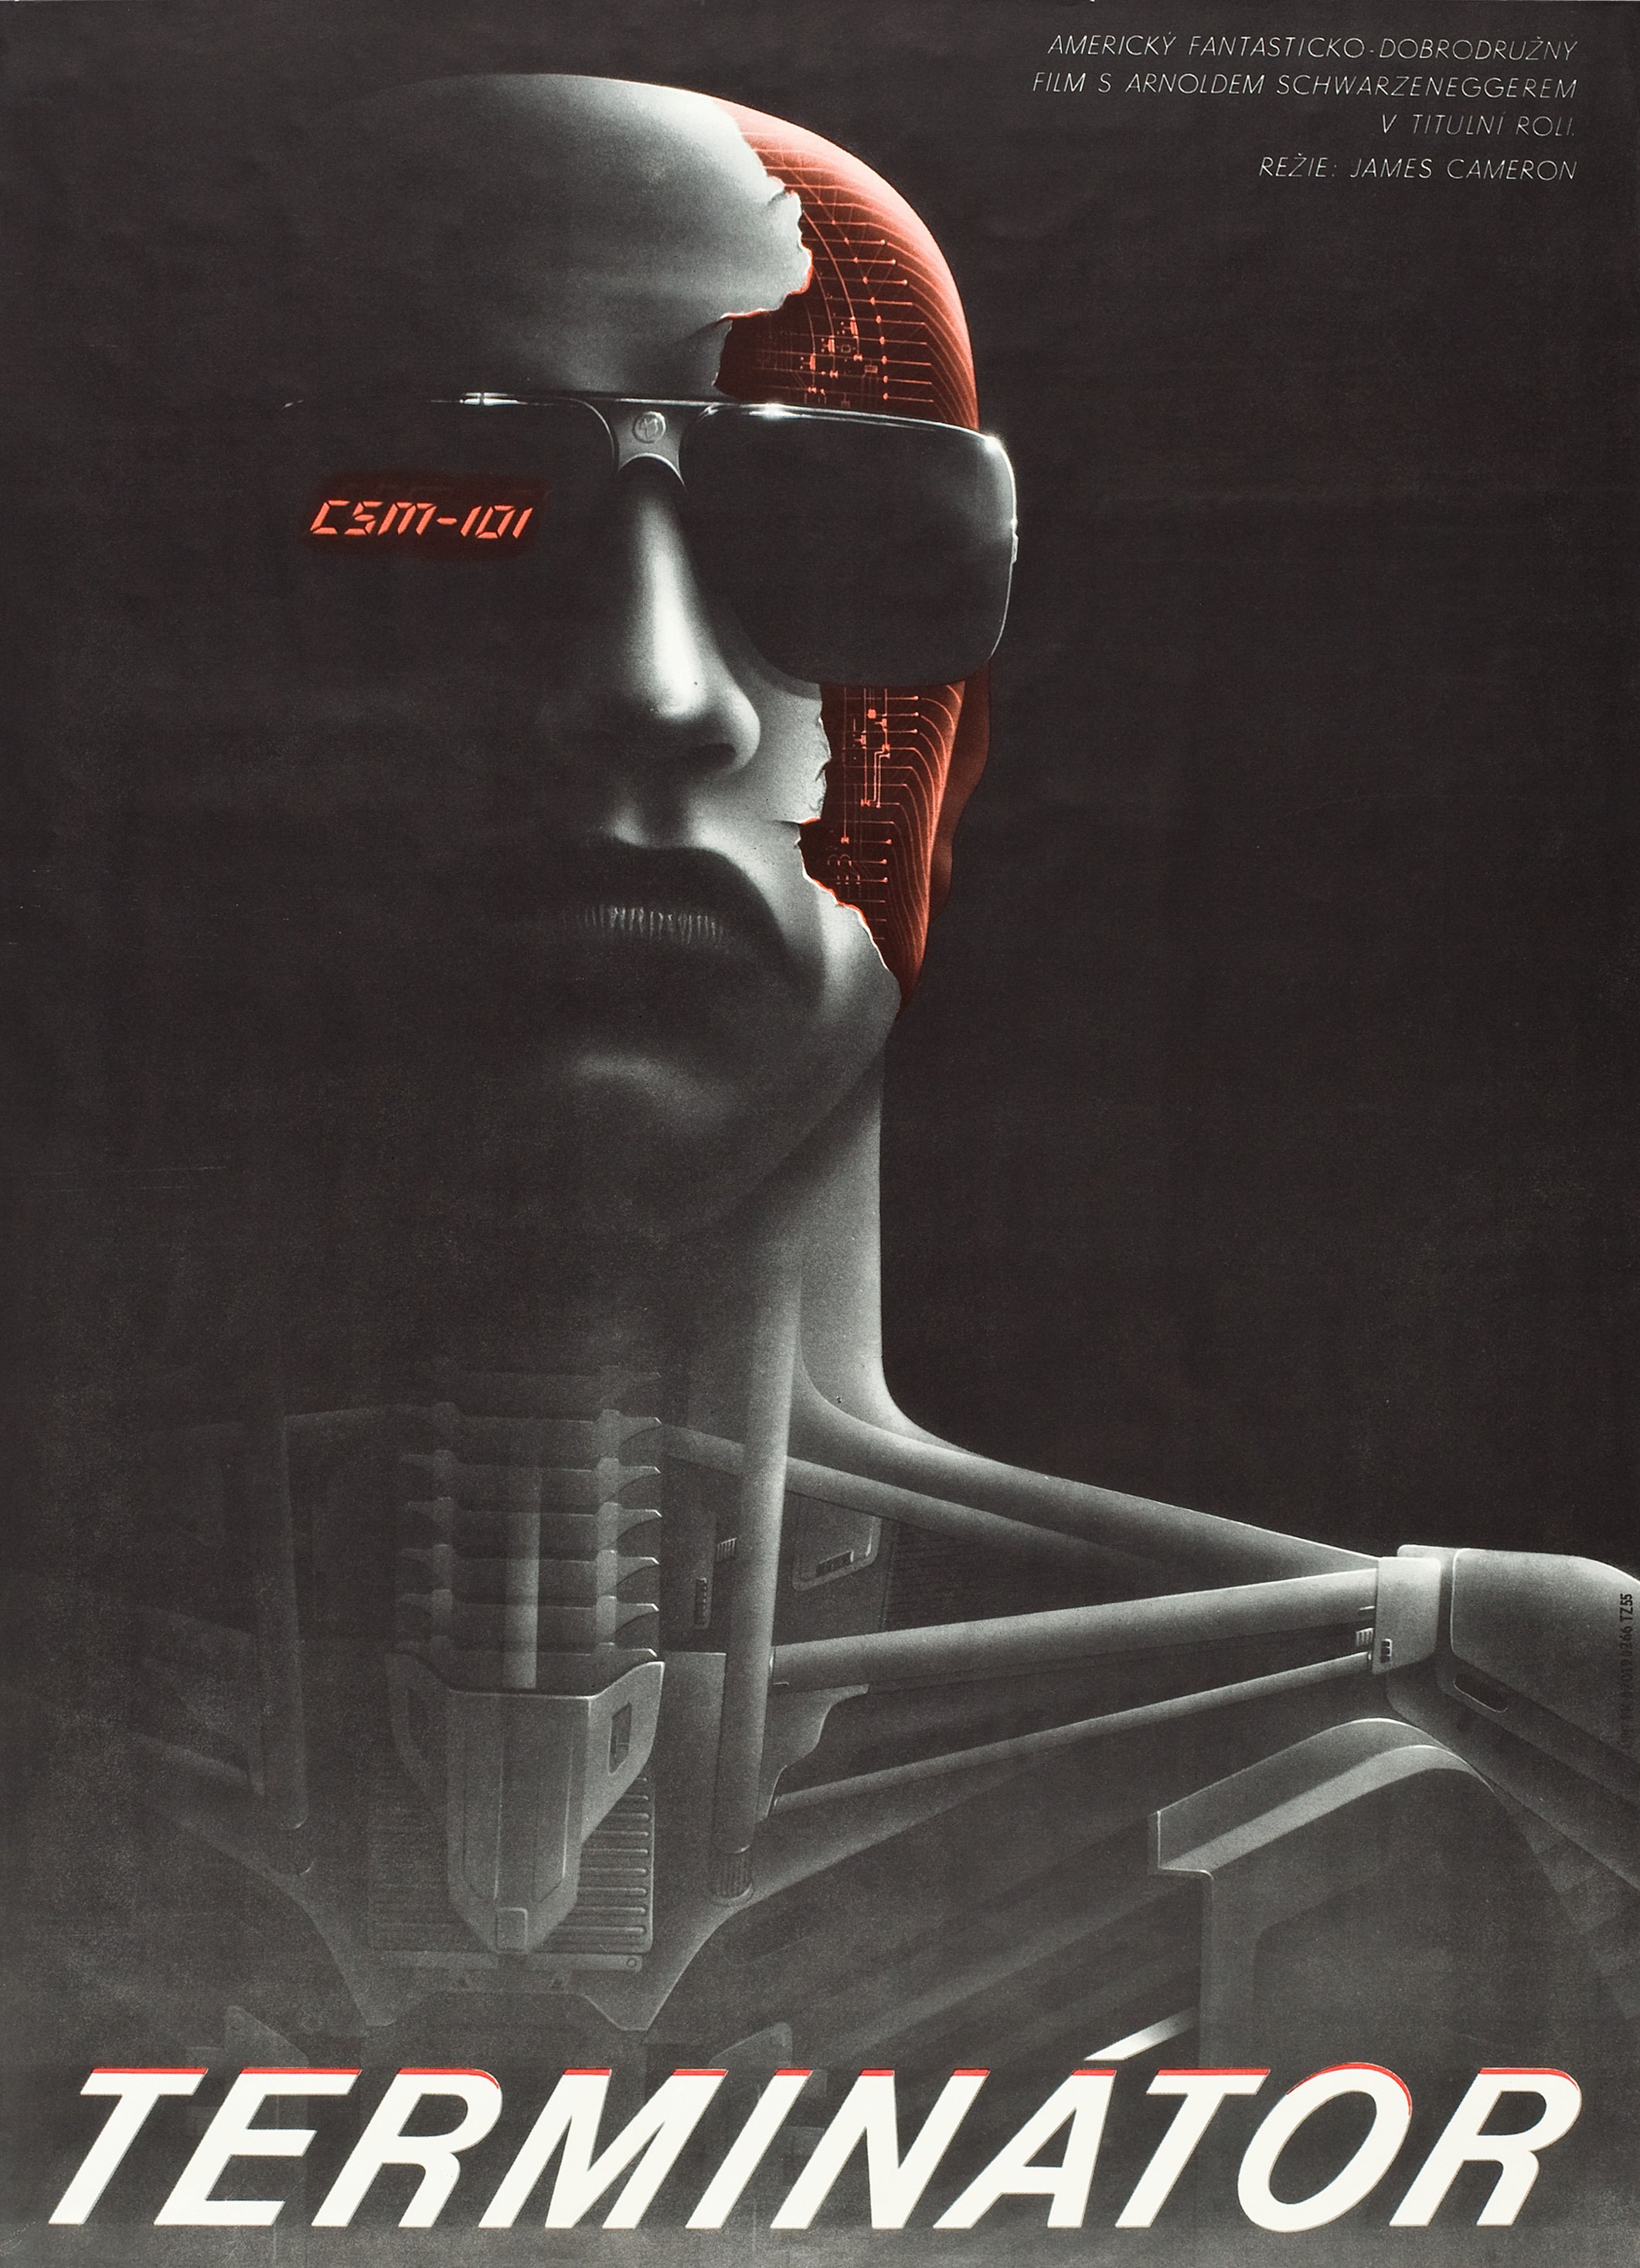 Mega Sized Movie Poster Image for The Terminator (#7 of 7)